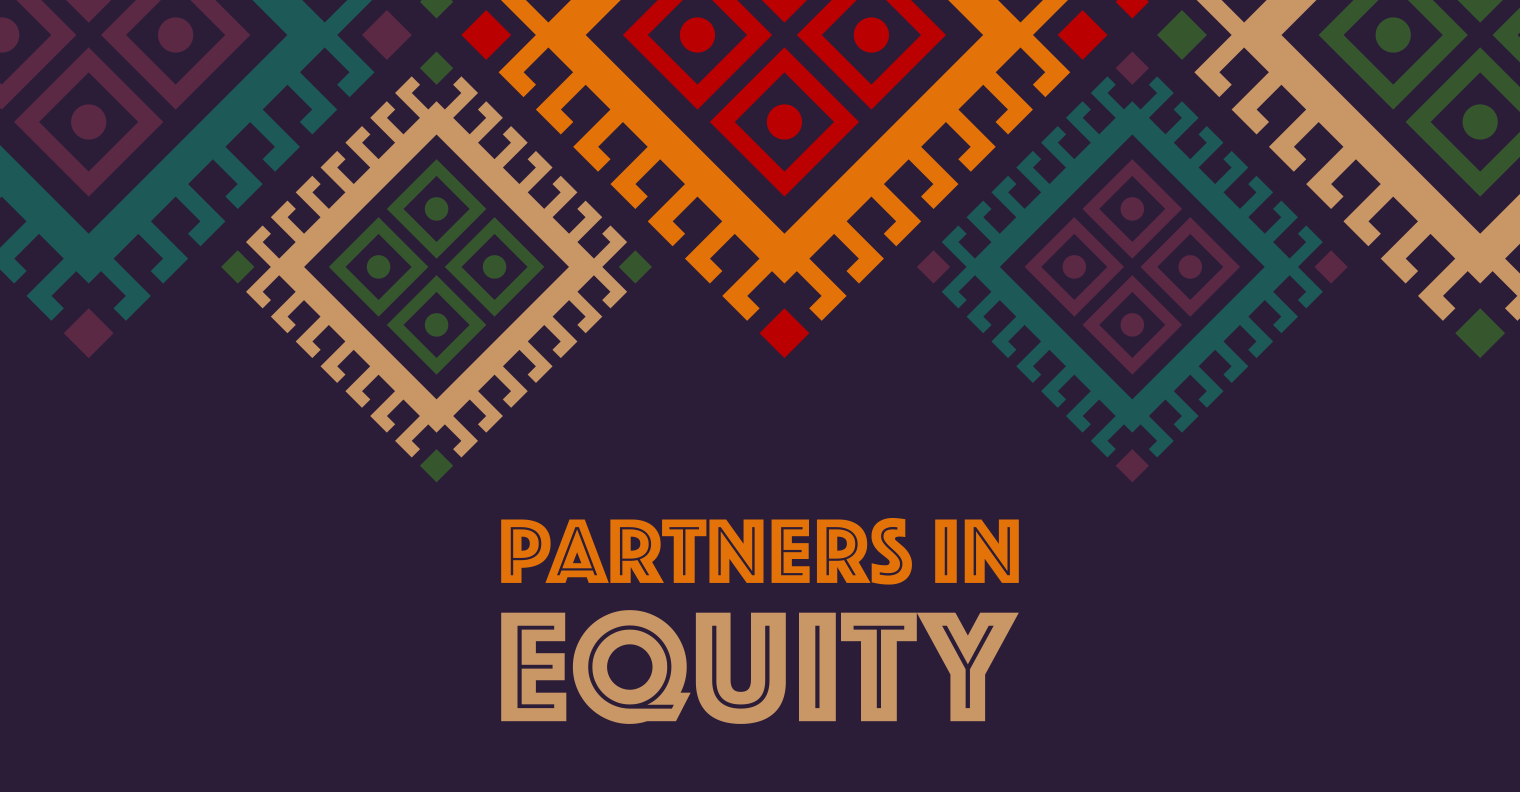 Lead in graphic that states "Partners in Equity"